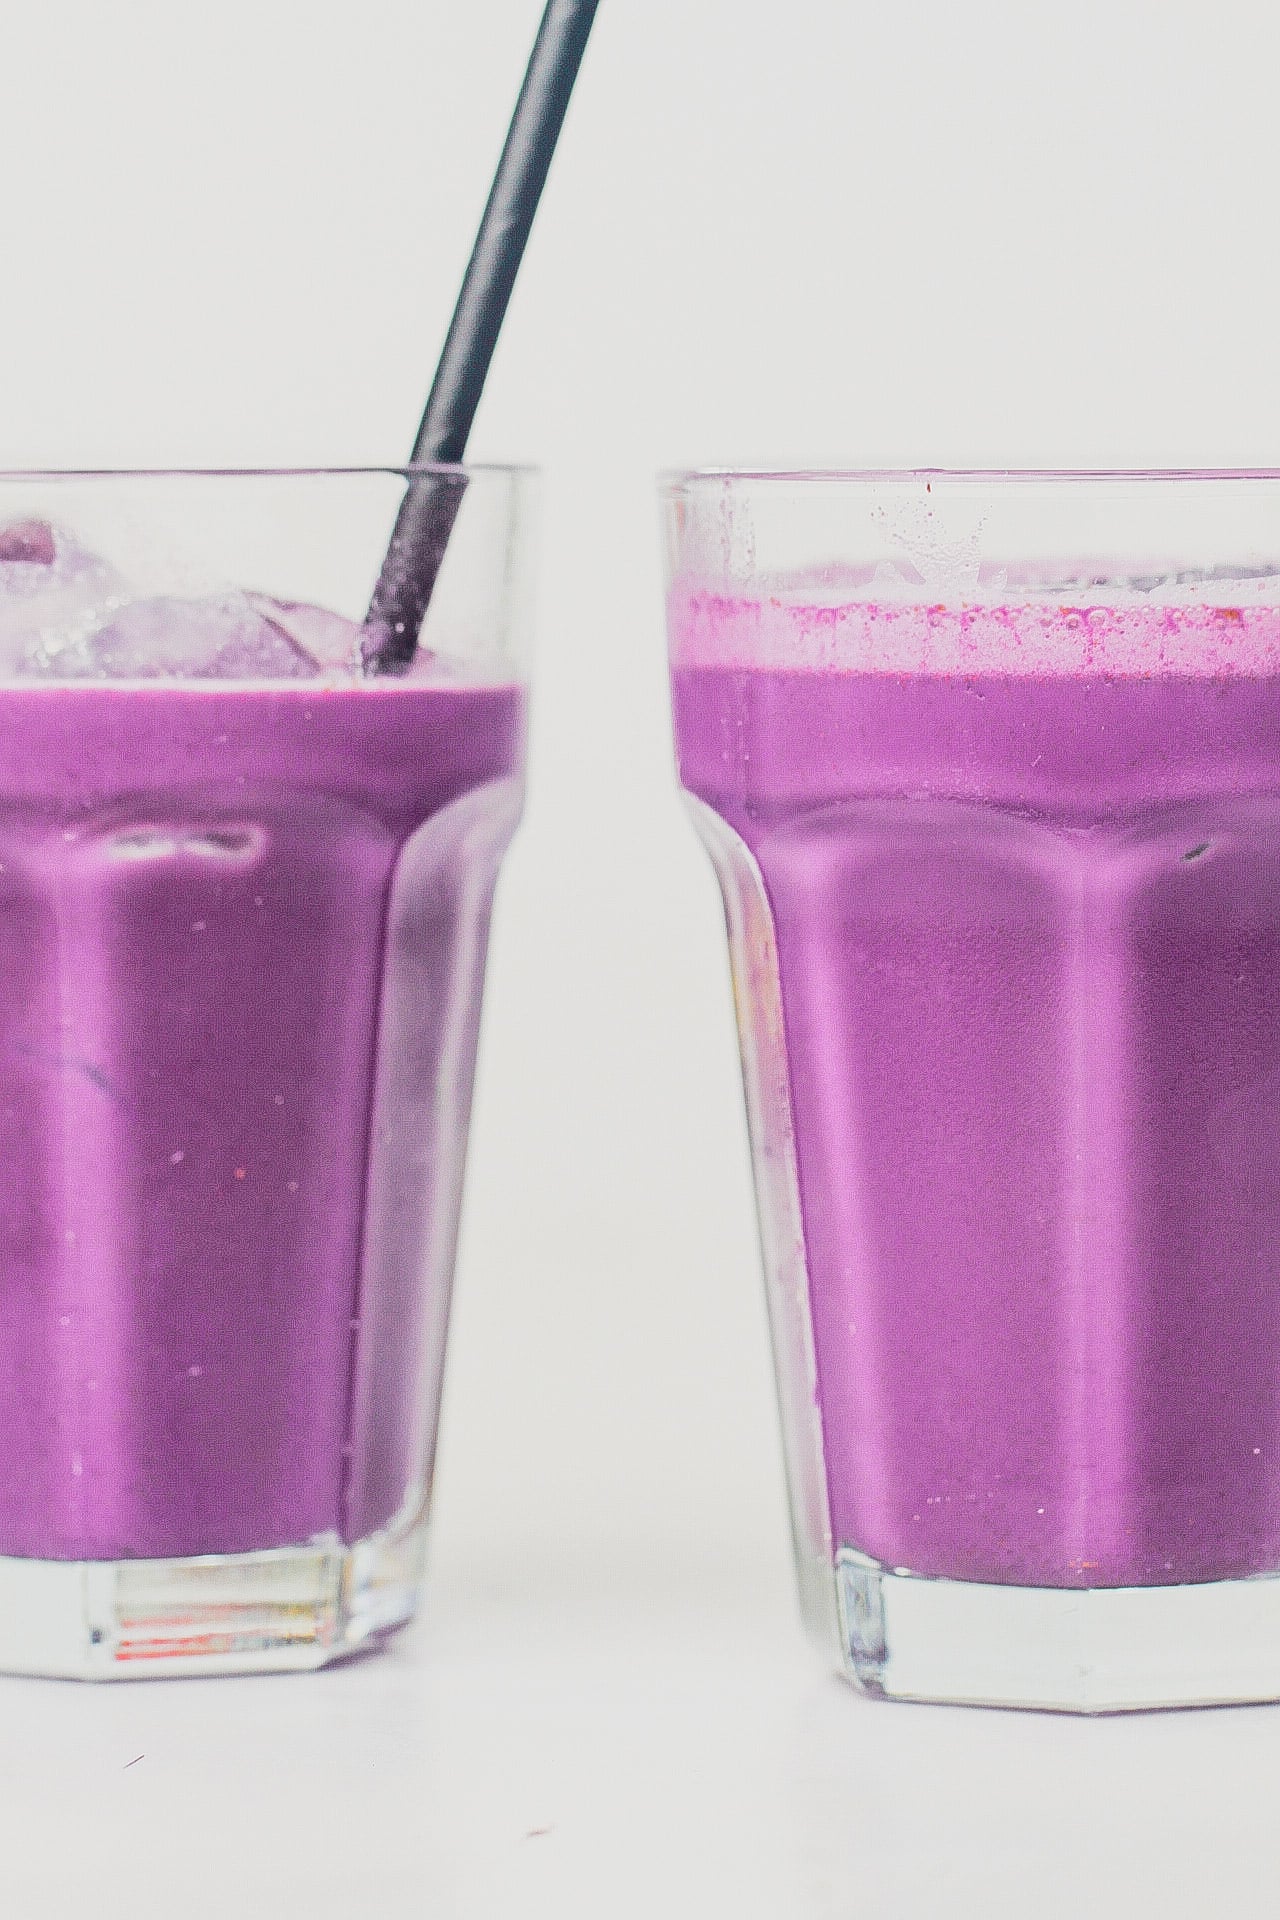 Ube Horchata in glasses and a black straw